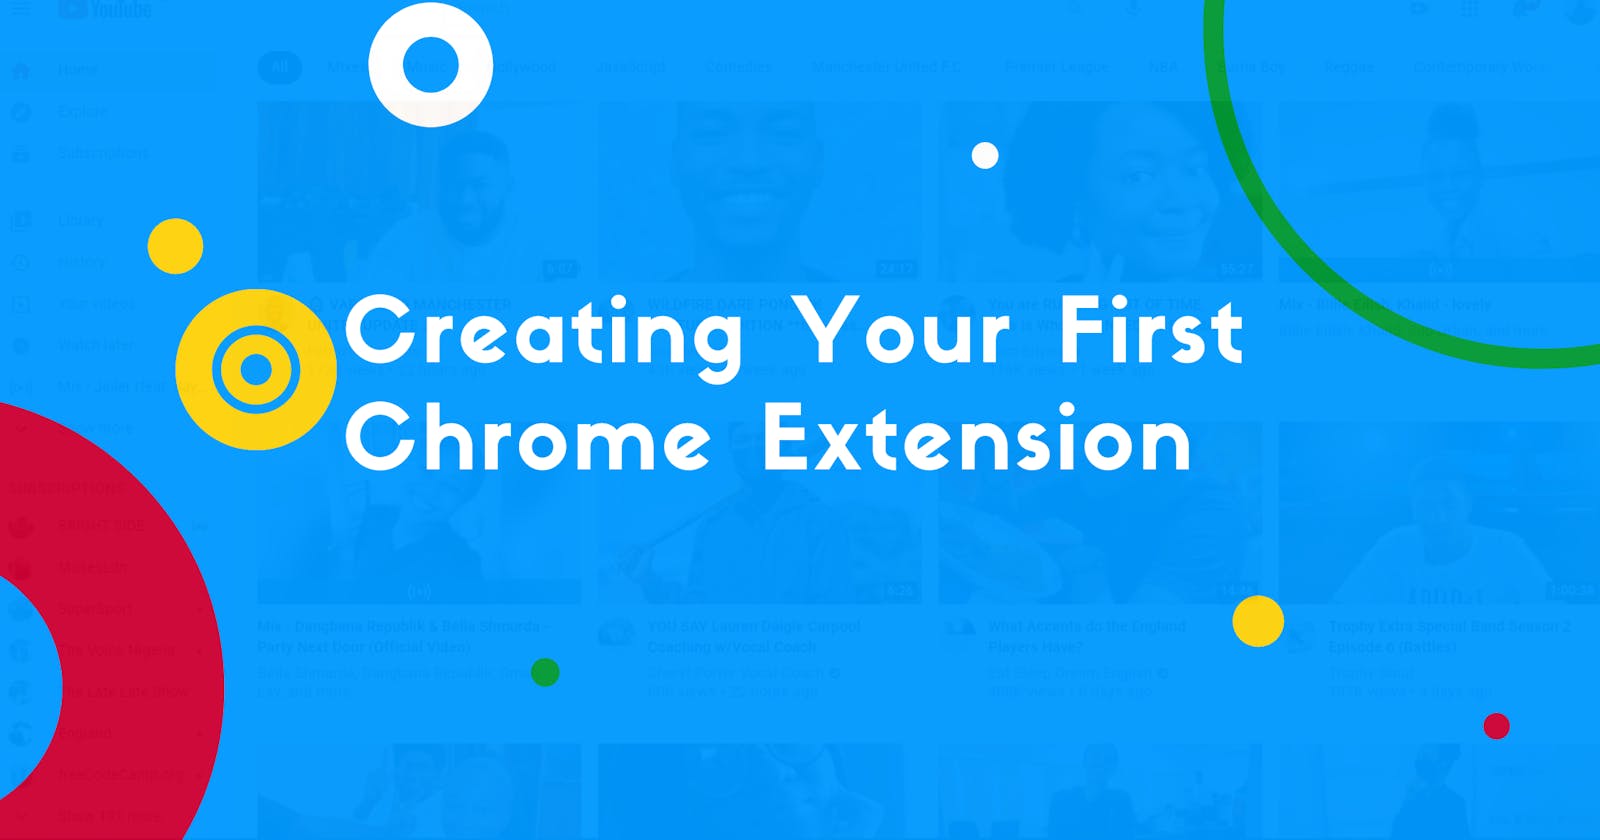 Creating Your First Chrome Extension